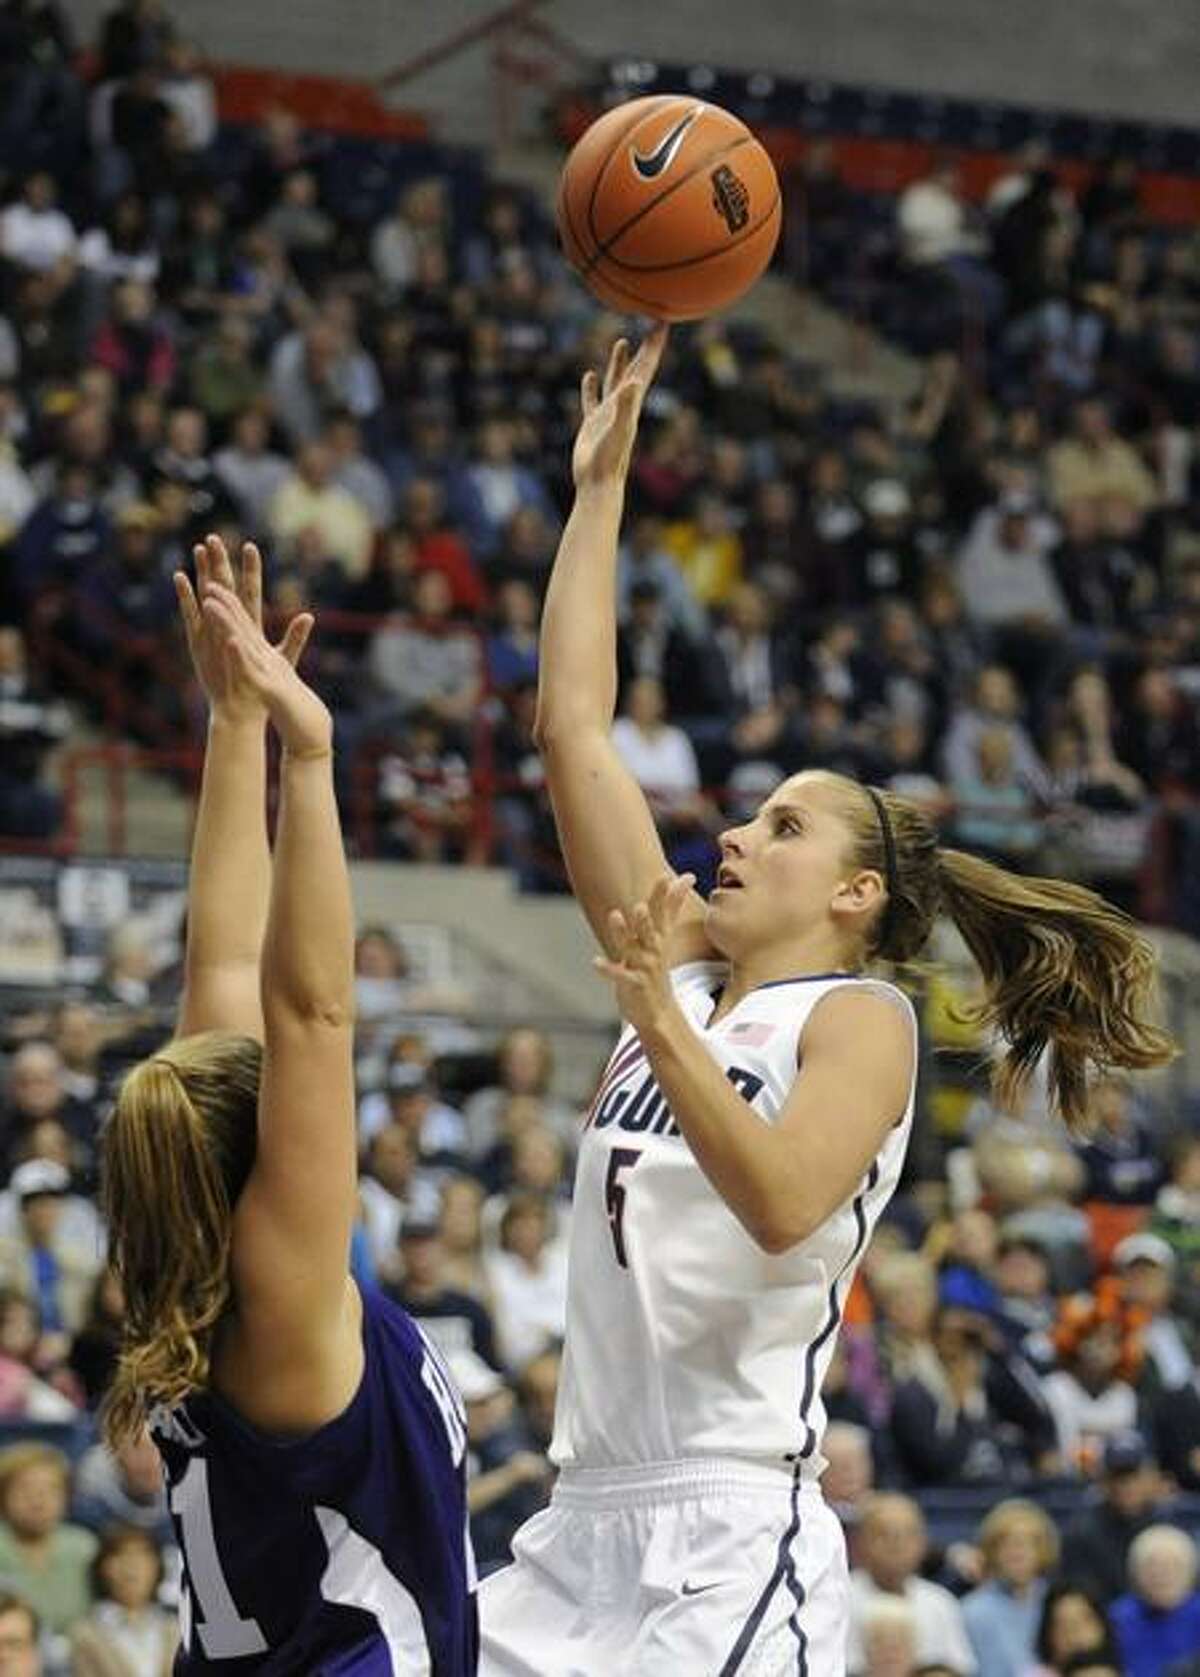 Connecticut's Caroline Doty, right, shoots over Holy Cross' Meredith Ward, left, in the second half of an NCAA women's college basketball game in Storrs, Conn., Sunday, Nov. 13, 2011. Doty, who sat out last season with her third major knee injury, scored nine points and played 22 minutes in her first game back since the 2010 national championship game. (AP Photo/Jessica Hill)